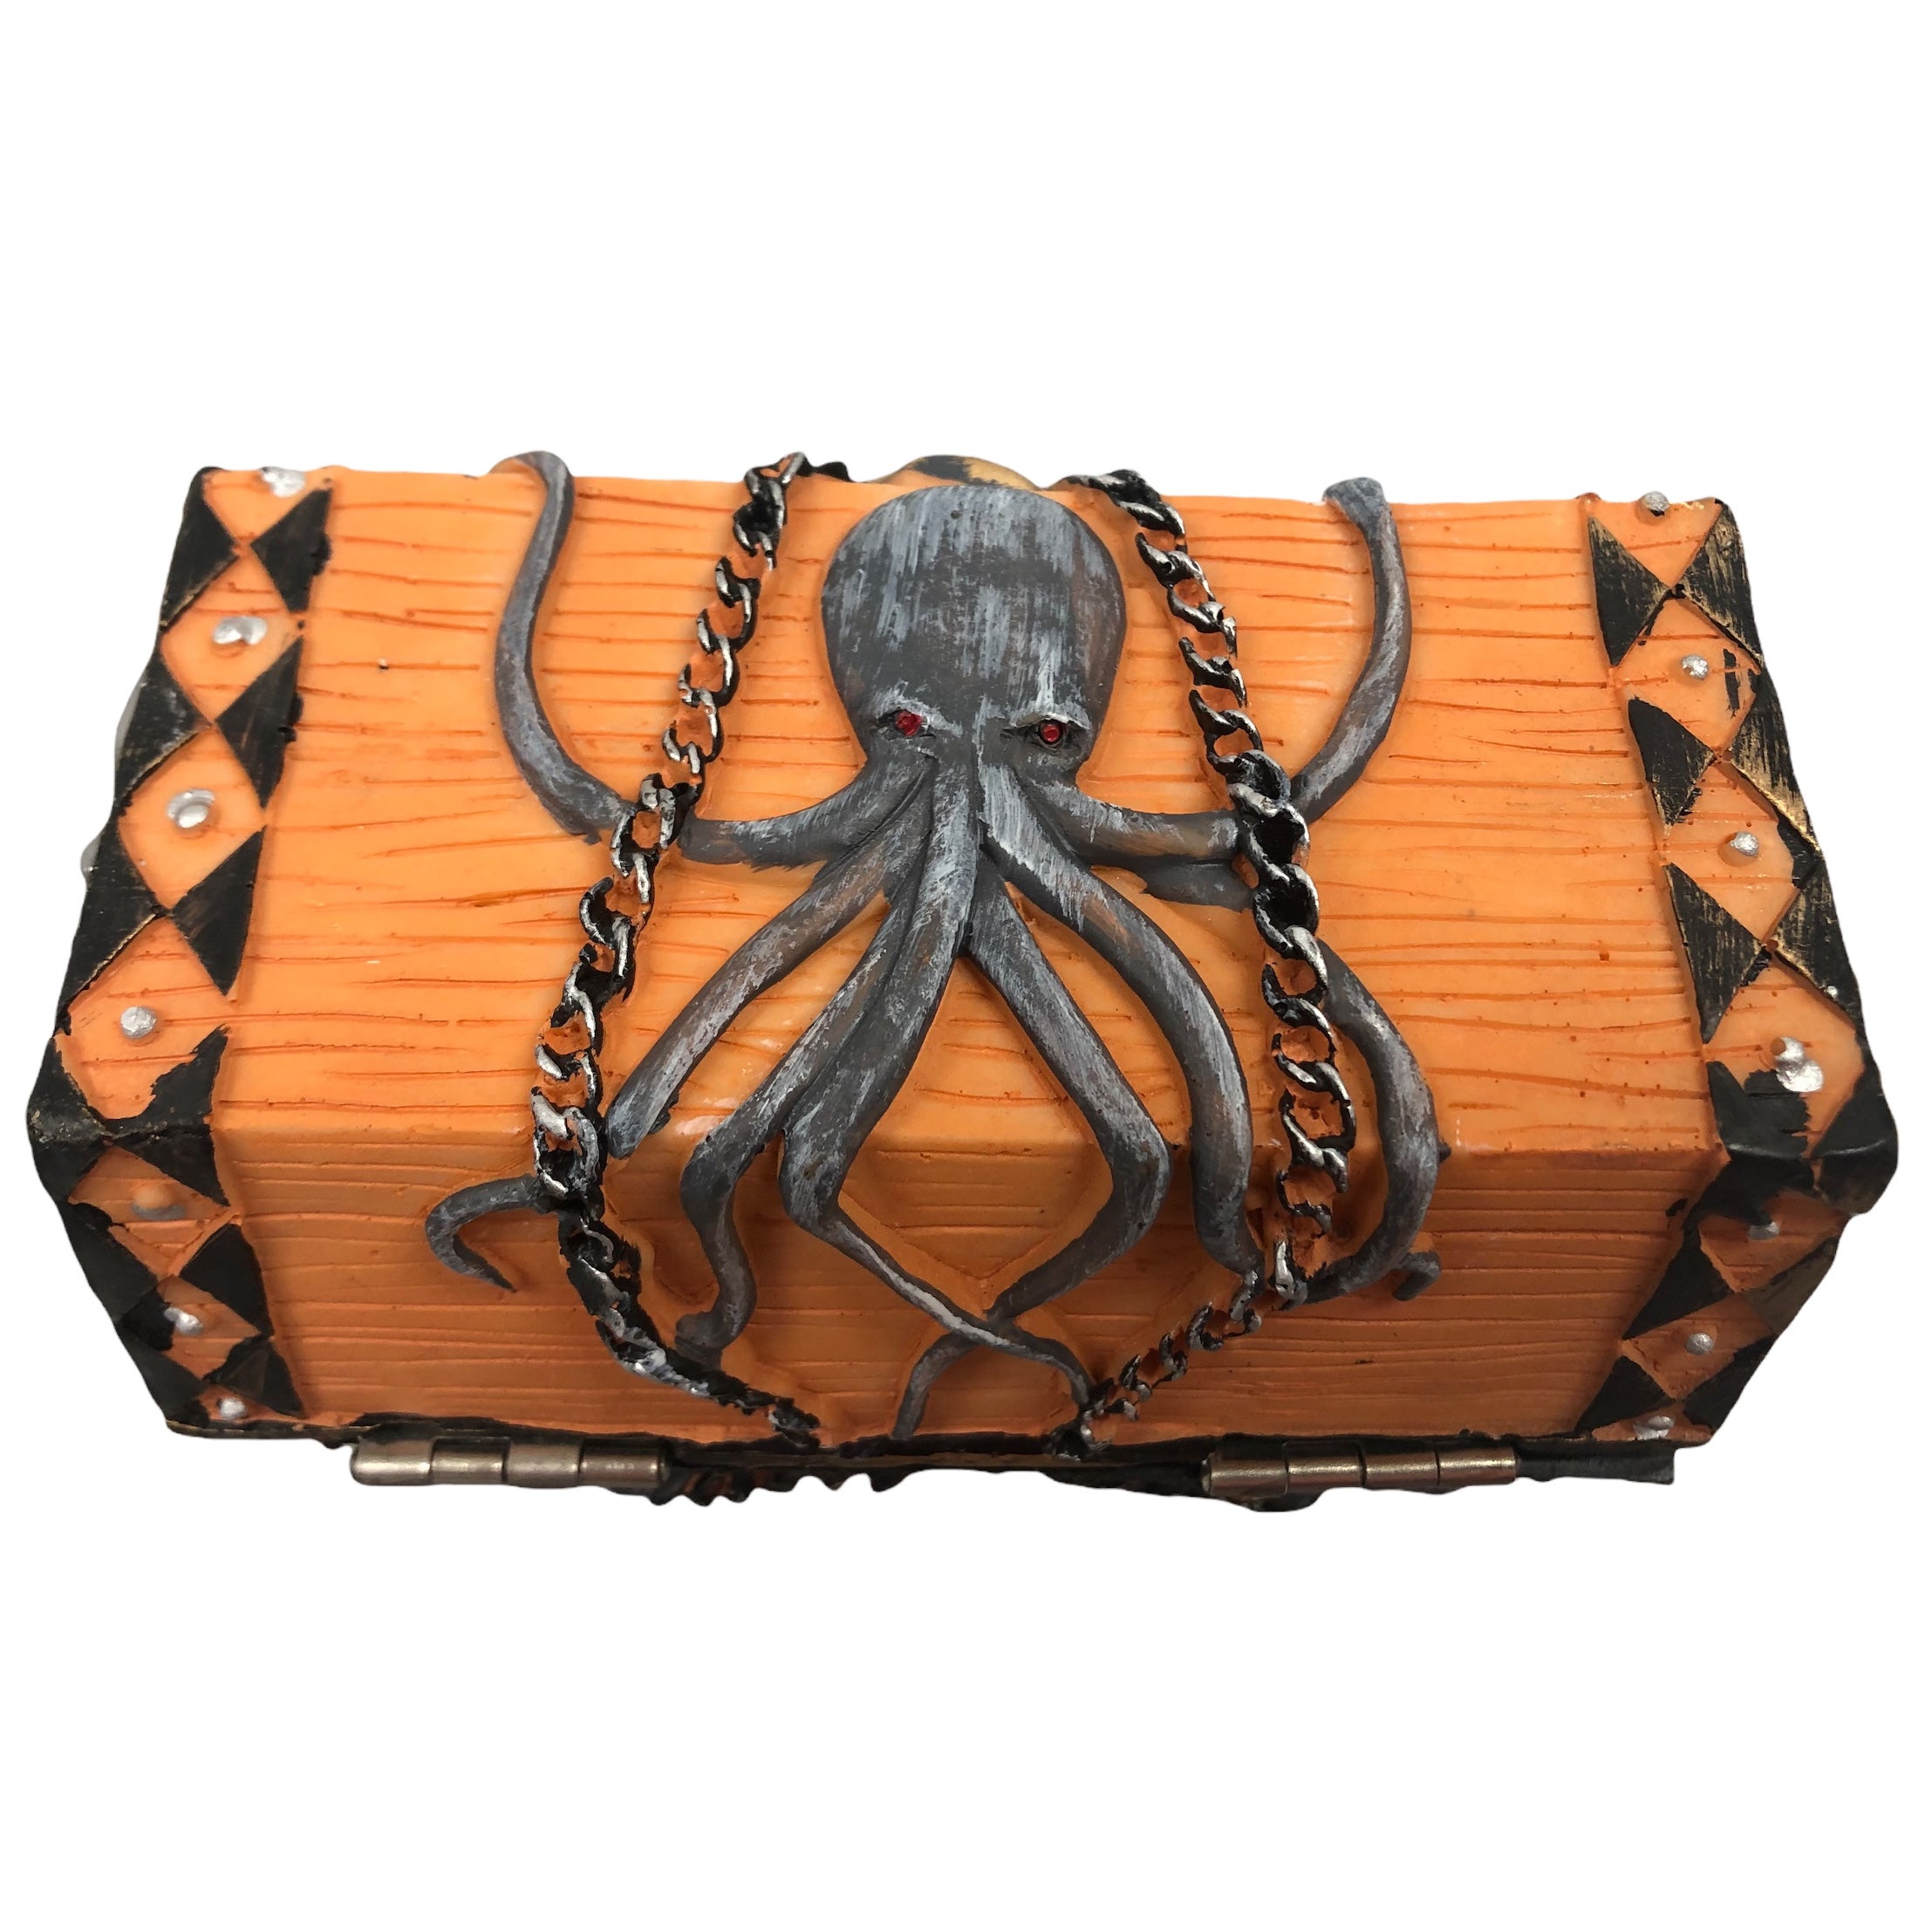 Octopus Chest with Mixed Doubloons